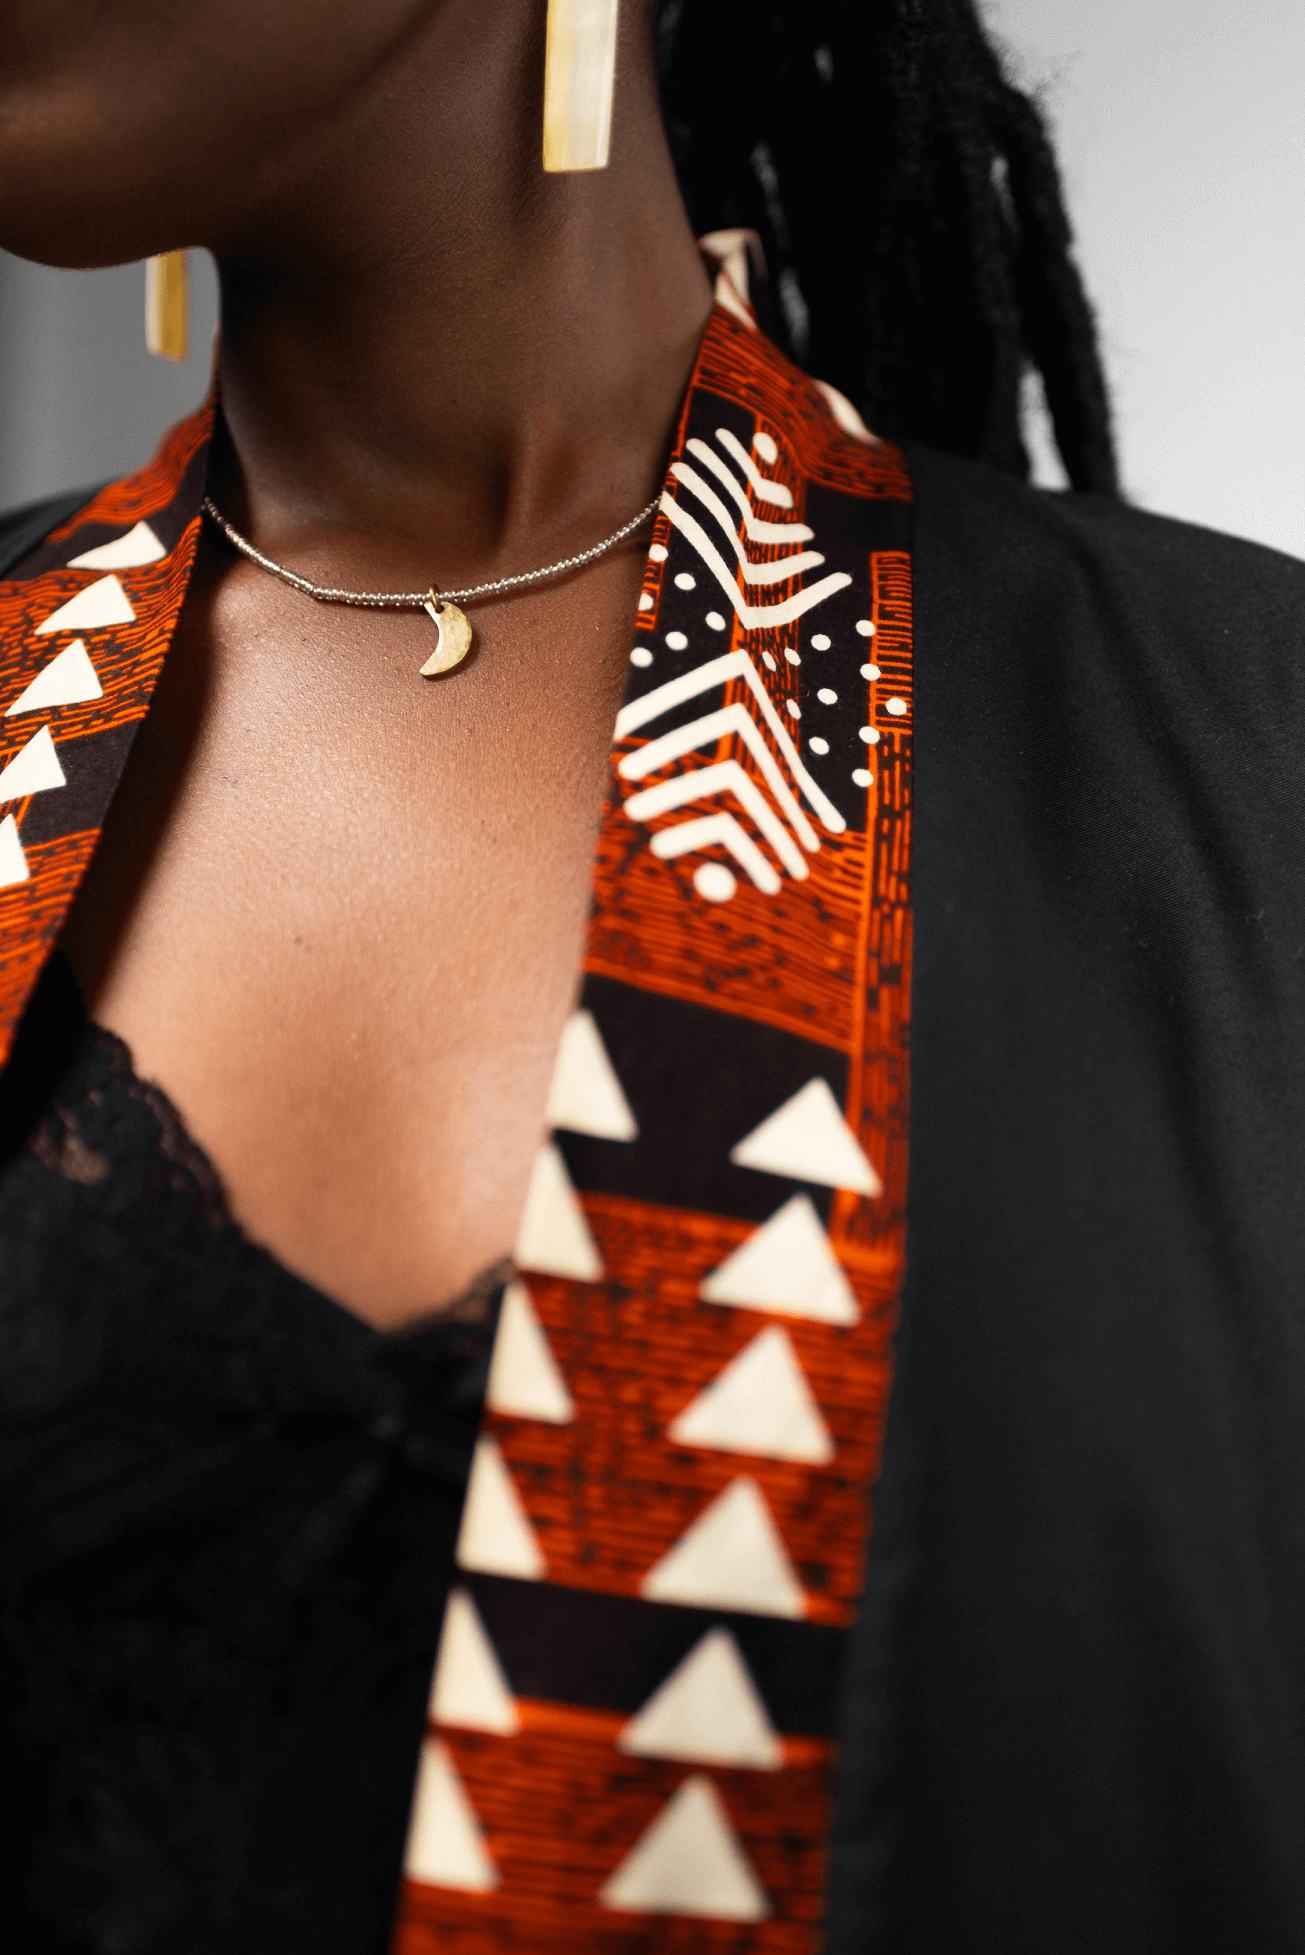 Shop The Carolina Choker by Soluna Collections on Arrai. Discover stylish, affordable clothing, jewelry, handbags and unique handmade pieces from top Kenyan & African fashion brands prioritising sustainability and quality craftsmanship.